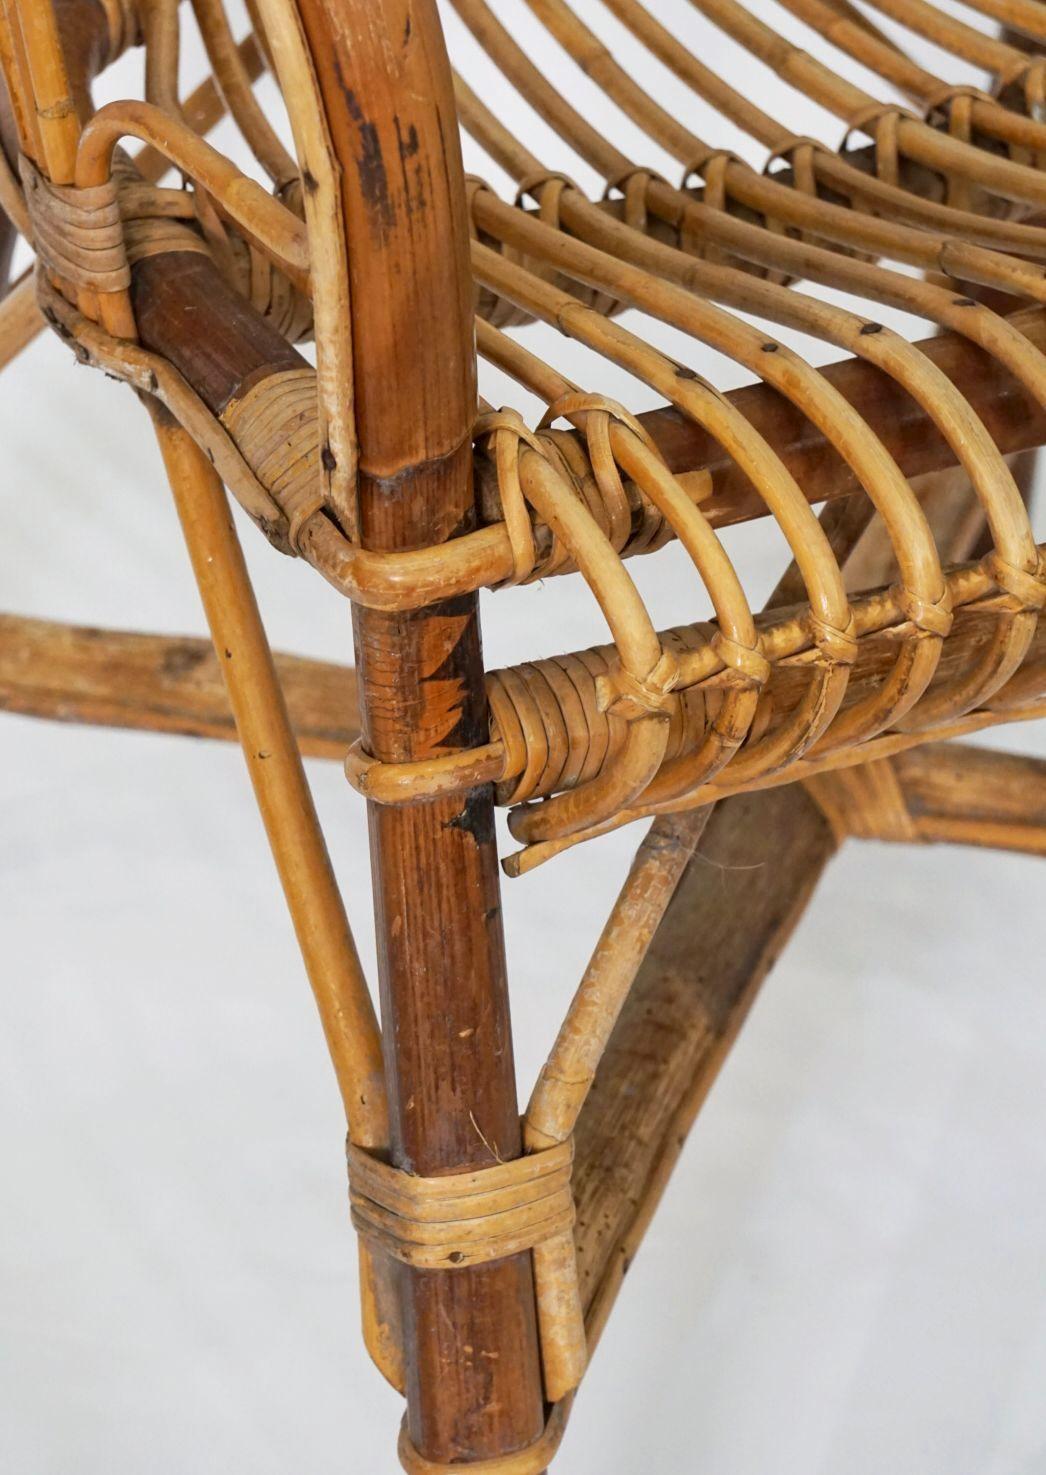 Italian Fan-Backed Arm Chairs of Rattan and Bamboo from the Mid-20th Century For Sale 14